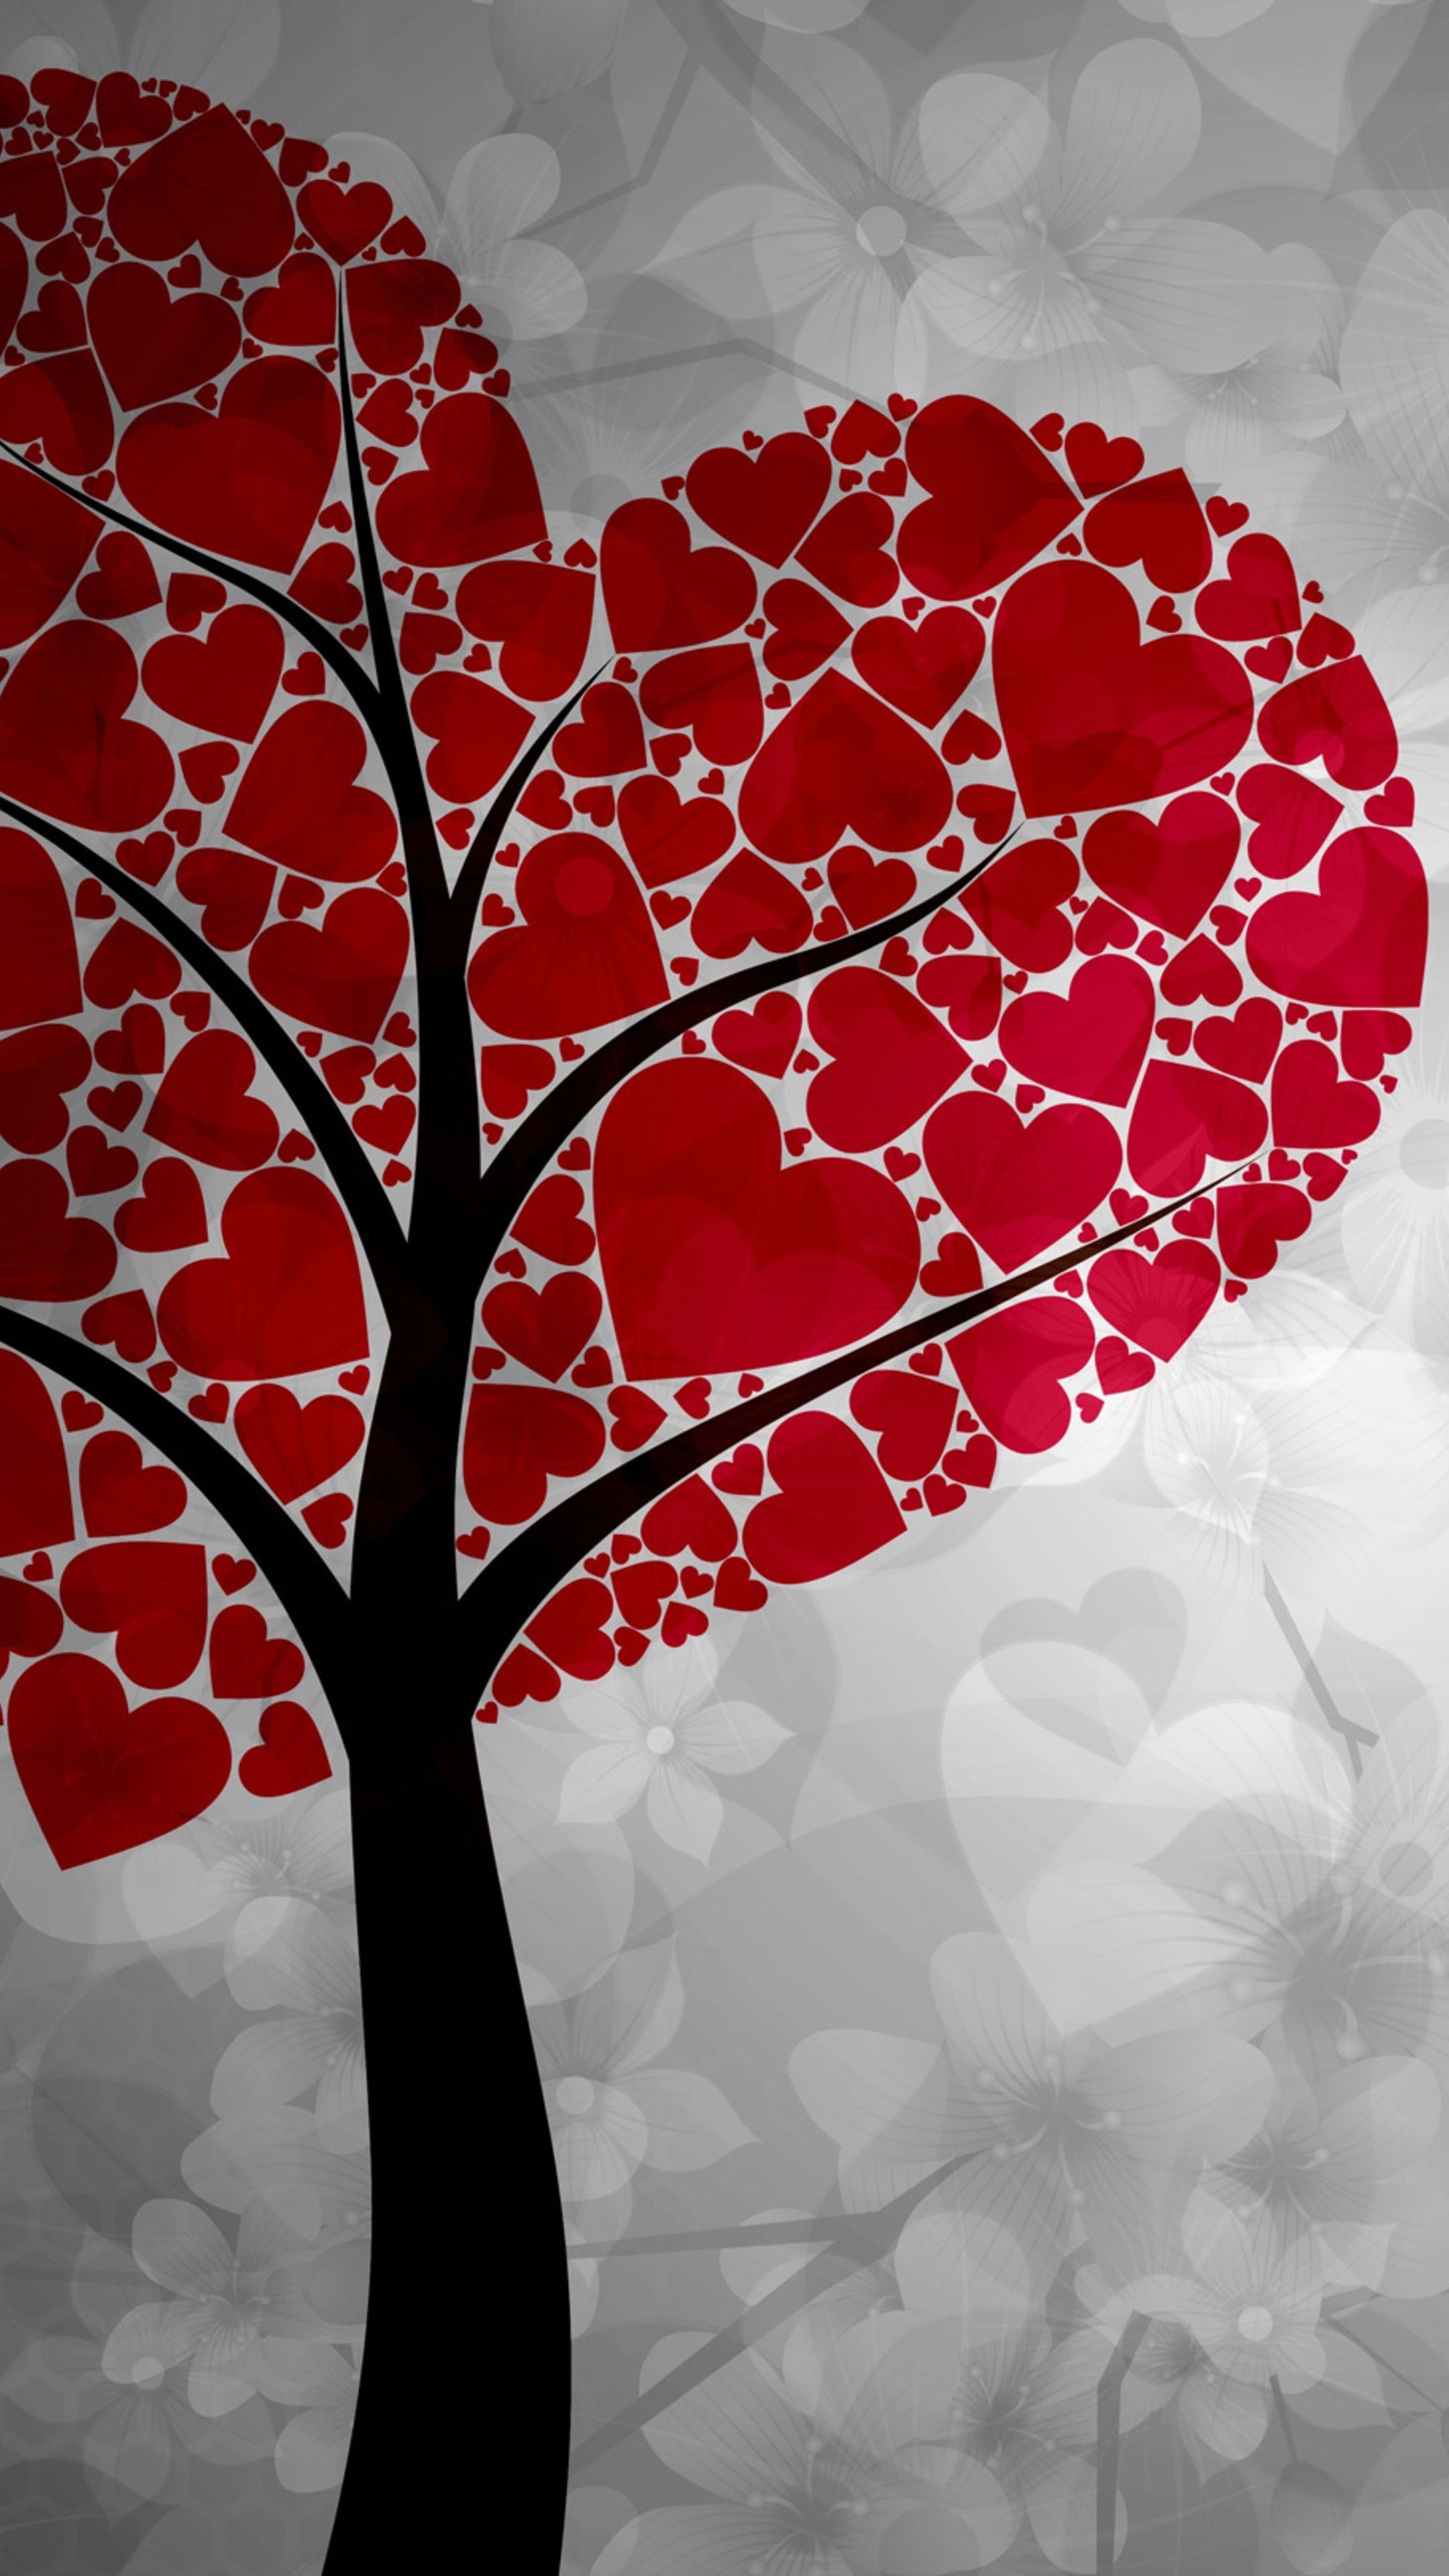 Heart Shape, Artistic wallpapers, Creative designs, Symbol of affection, 2160x3840 4K Phone